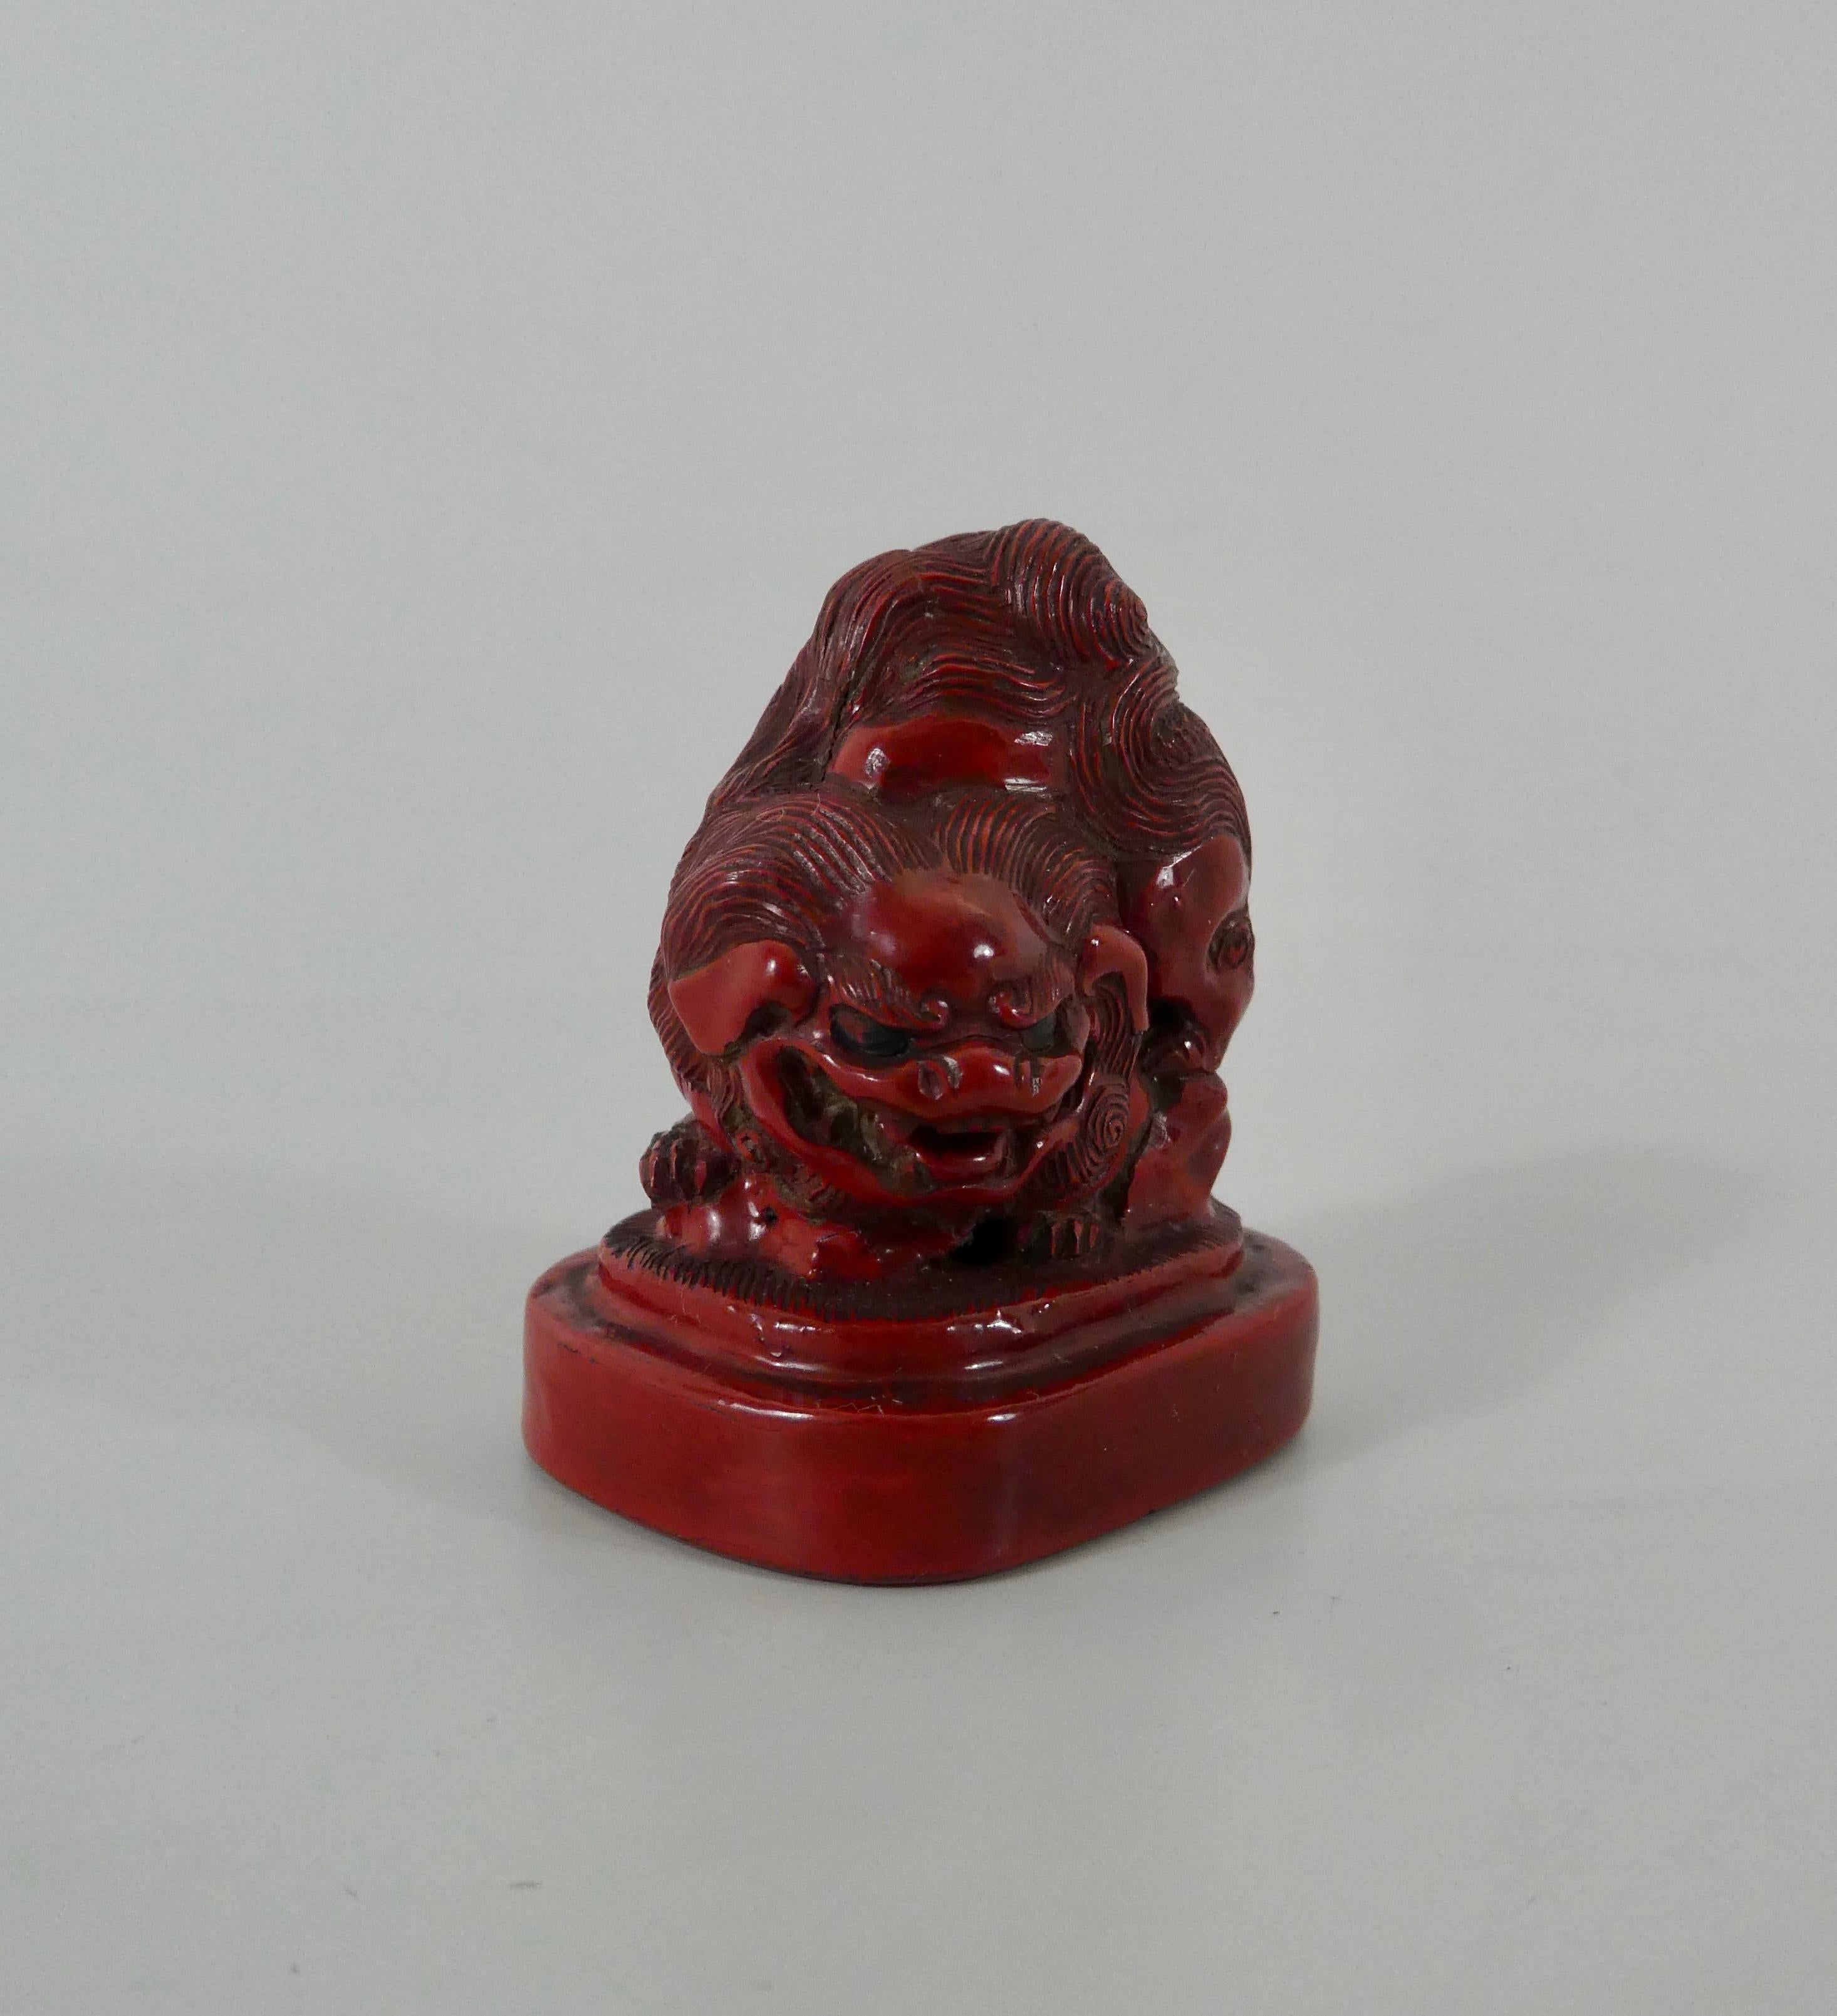 Japanese red lacquer (tsuishu) Shishi dog netsuke, early 19th century, Edo Period. The finely detailed dog, clambering over a rock, and set upon a stepped and shaped oval base. The himotoshi formed through the rock, and the base.
Measures: Height -